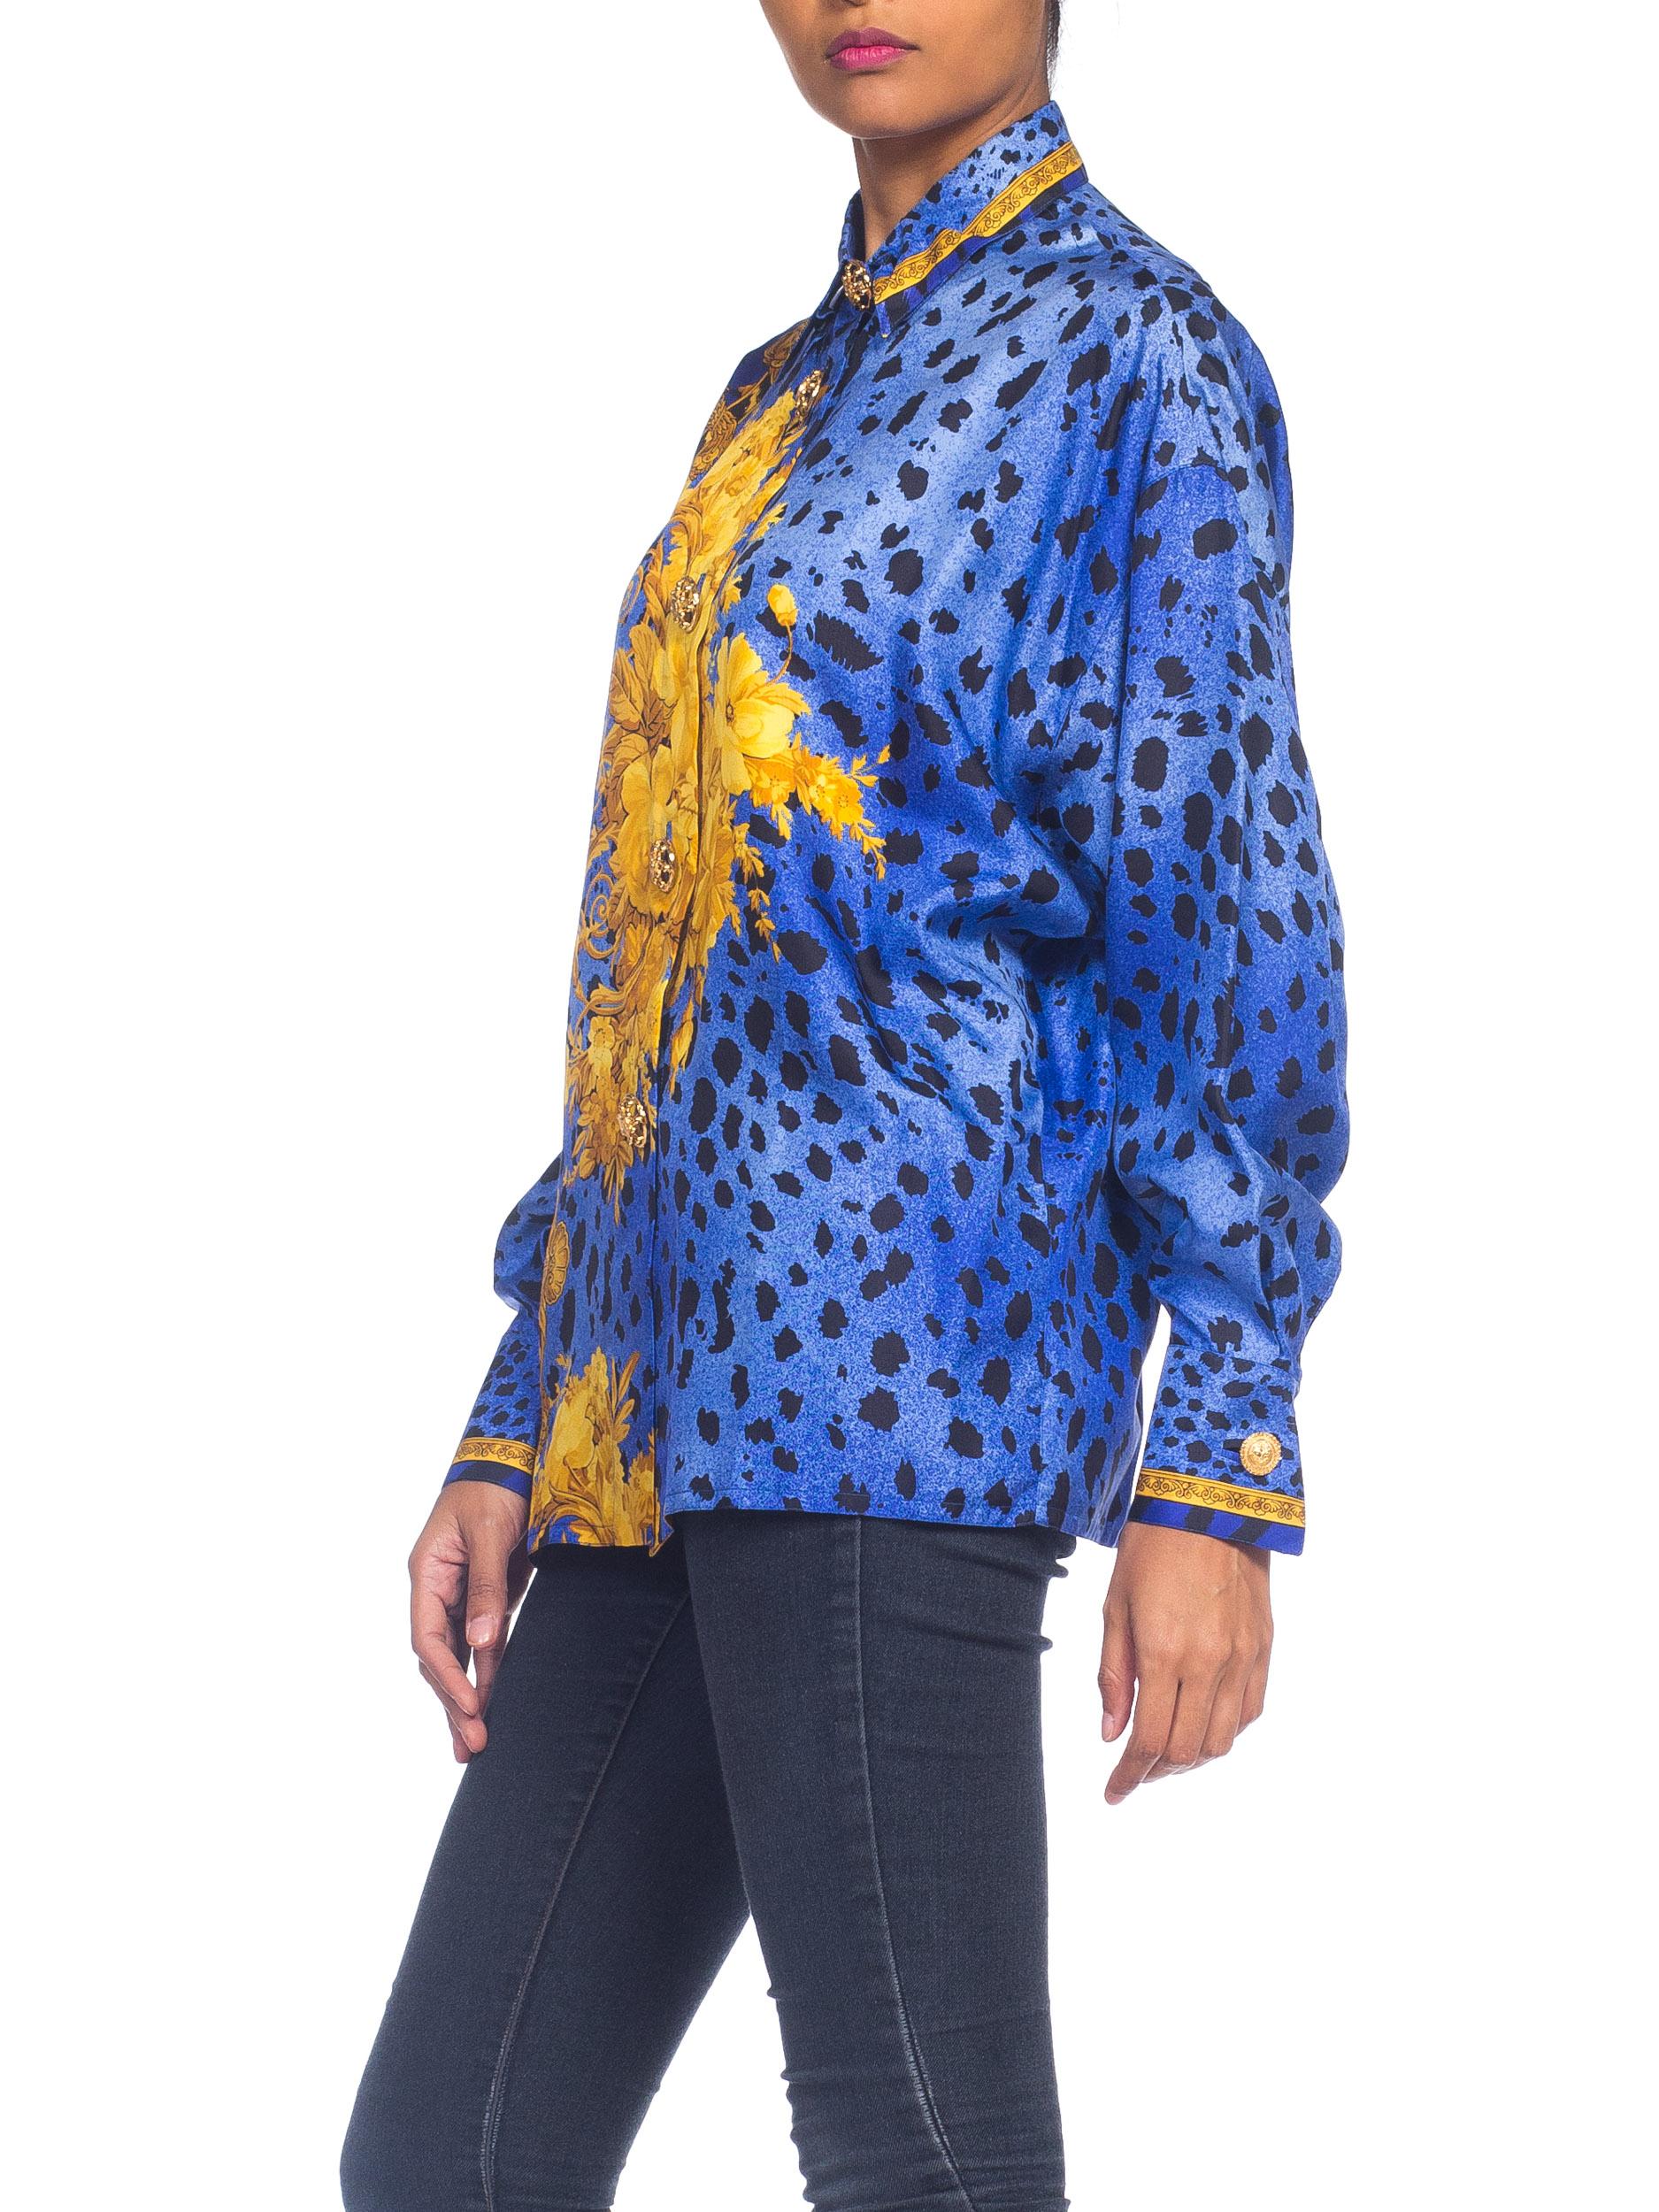 1990S GIANNI VERSACE Blue Silk Baroque Leopard Print Shirt With Gold Buttons For Sale 1